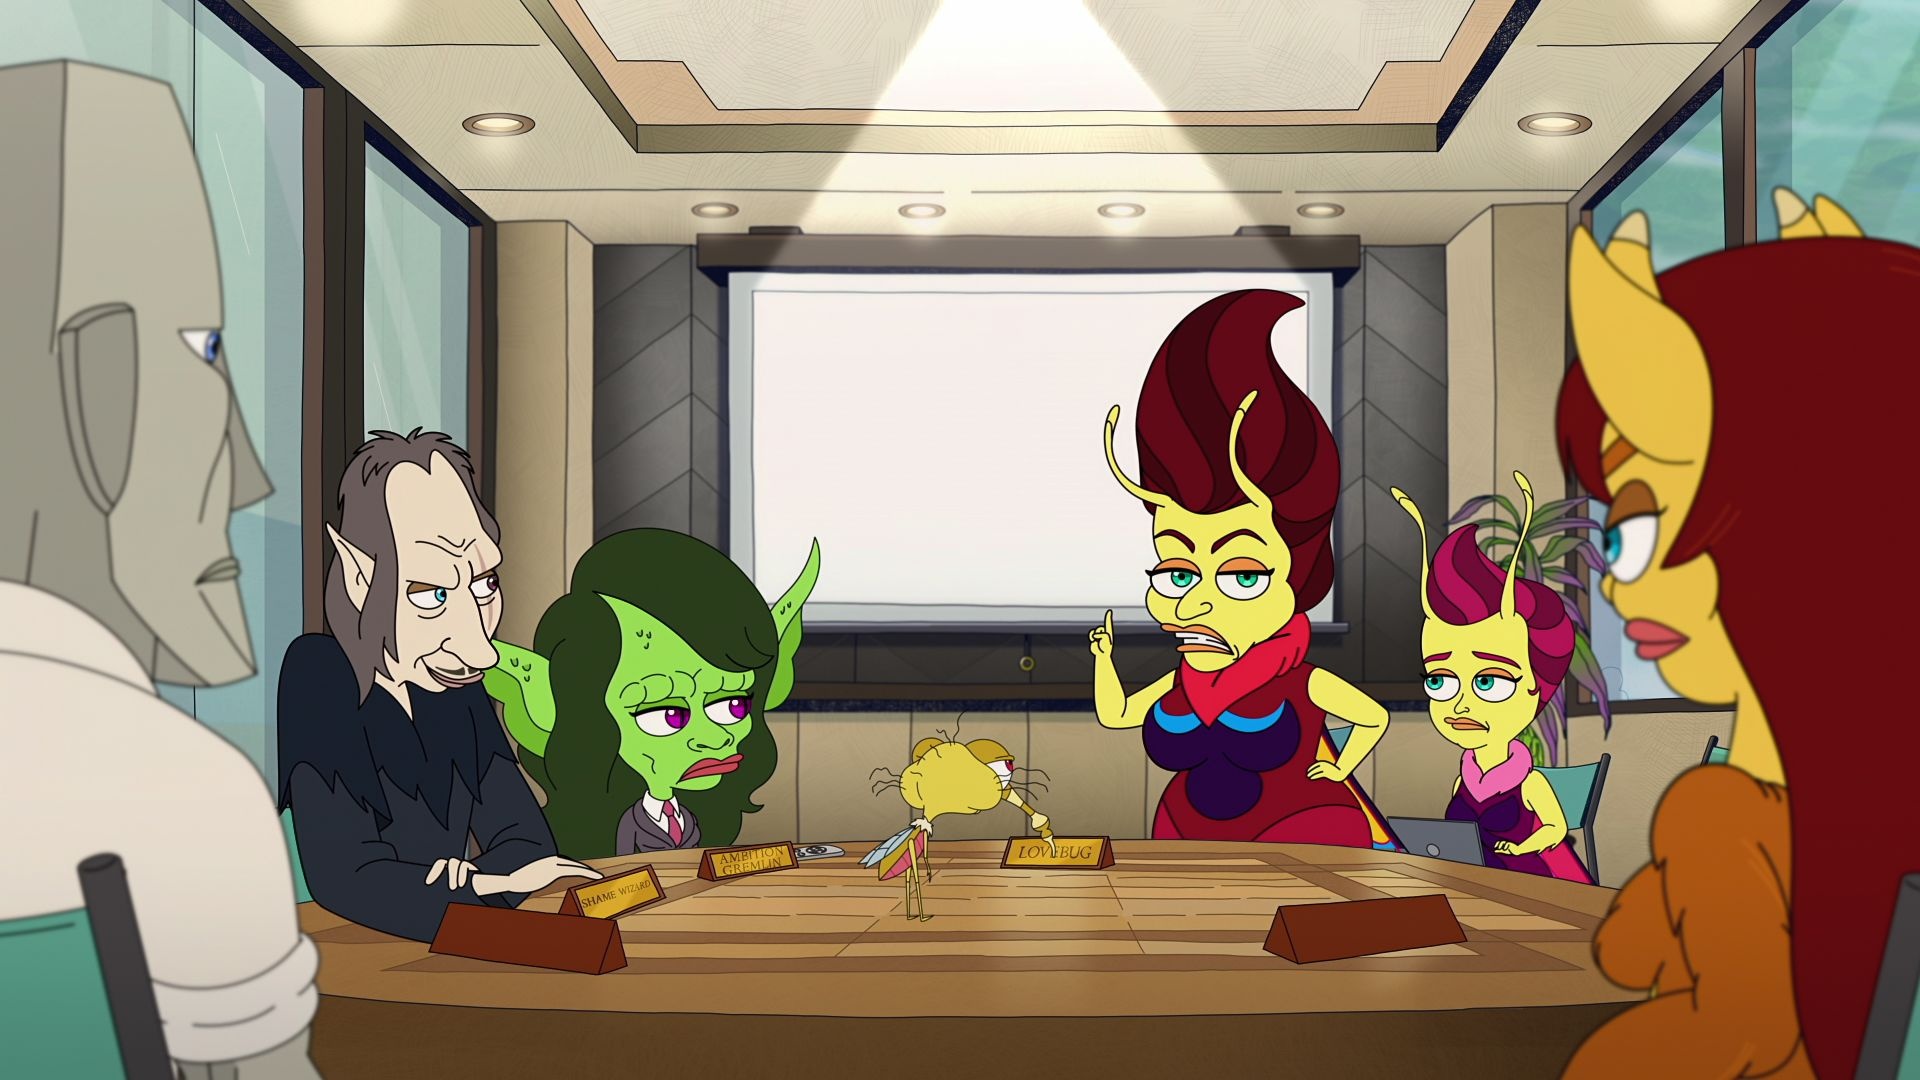 Human Resources, Netflix release, Big Mouth spinoff, Animated comedy, 1920x1080 Full HD Desktop